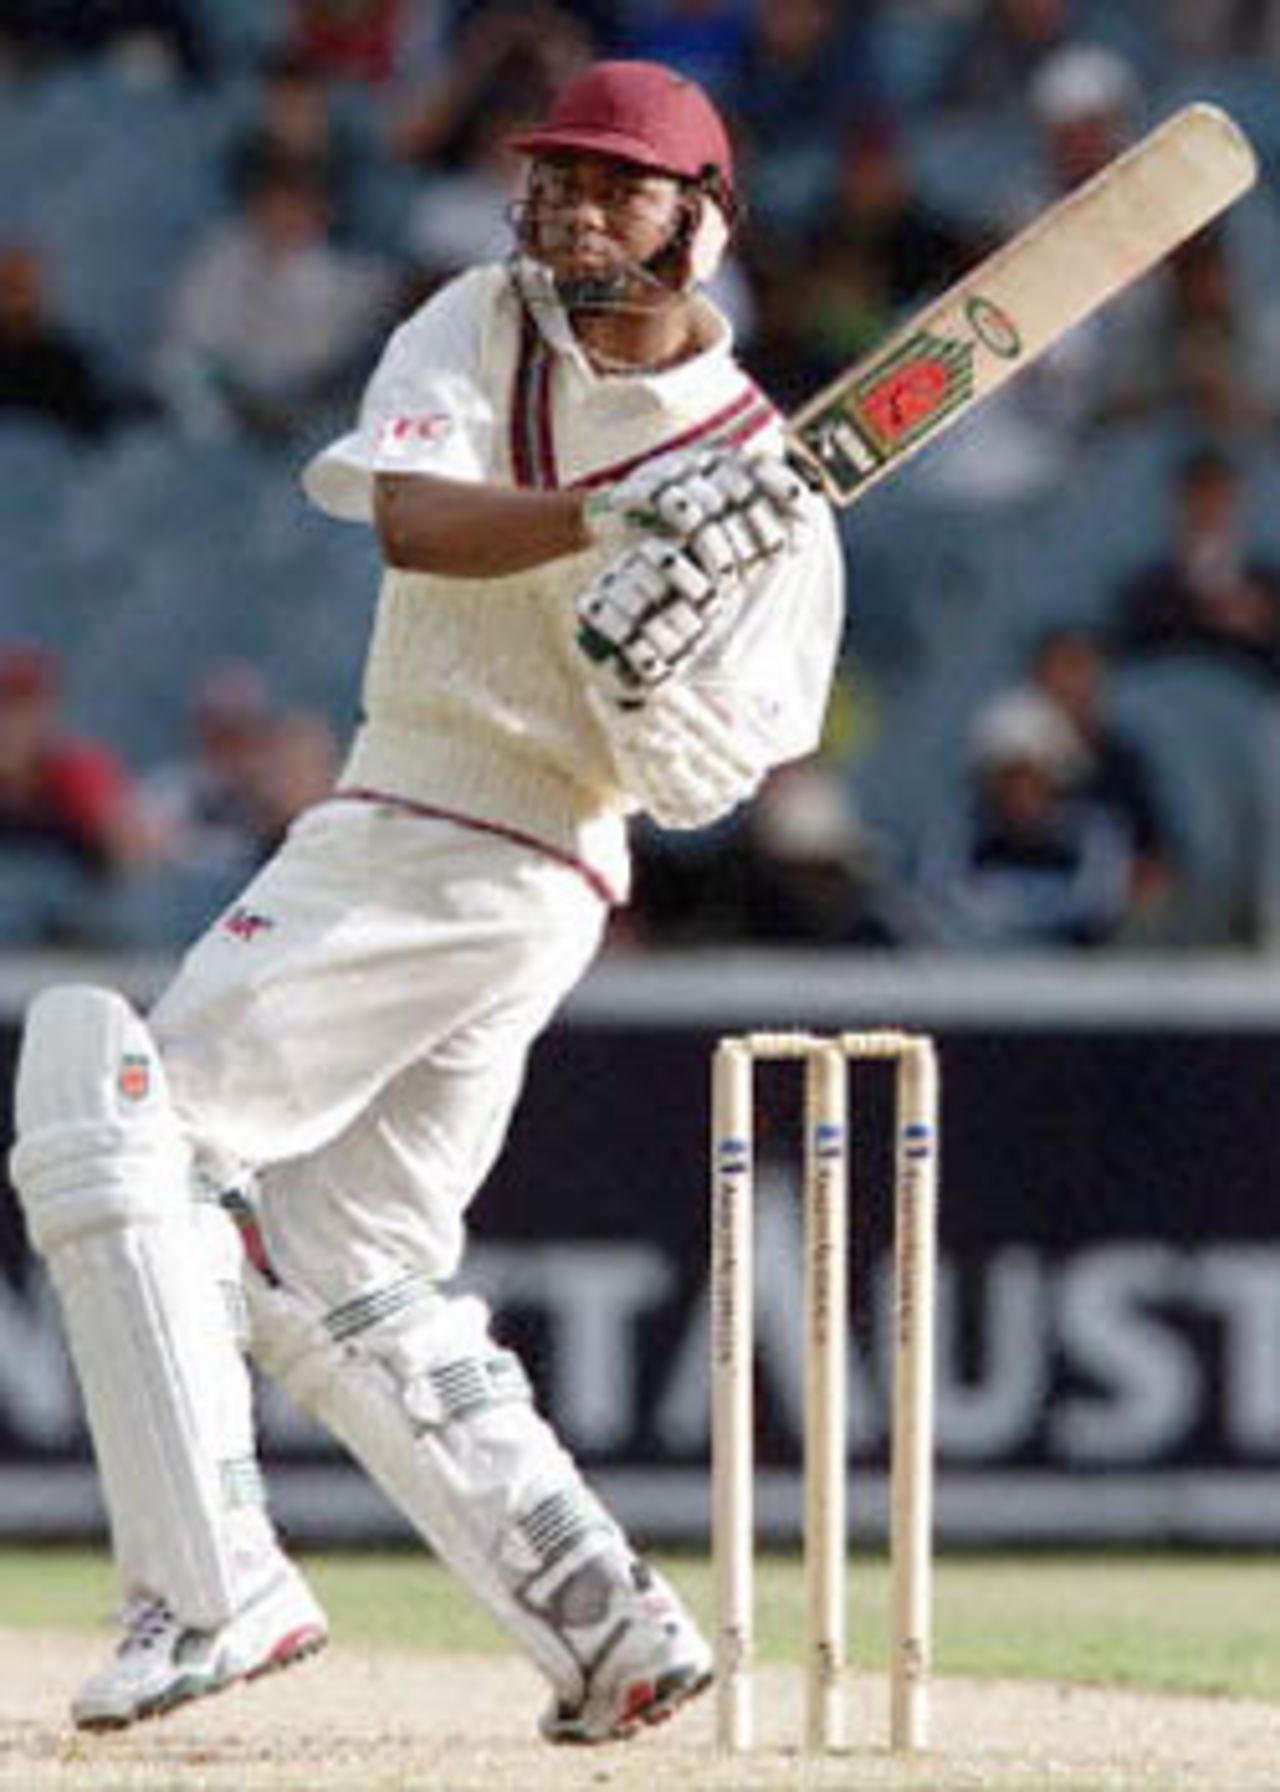 West Indian batsman Marlon Samuels hooks a ball fine from Australia paceman Andrew Bichel as the West Indies just manage to avoid the follow on on the second day of the fourth Test Match at the MCG in Melbourne, 27 December 2000. The West Indies scored 165 runs in their first innings with Samuels top scoring with 60 not out in reply to Australia's total of 364 runs with Australia to start their second innings tomorrow December 28.